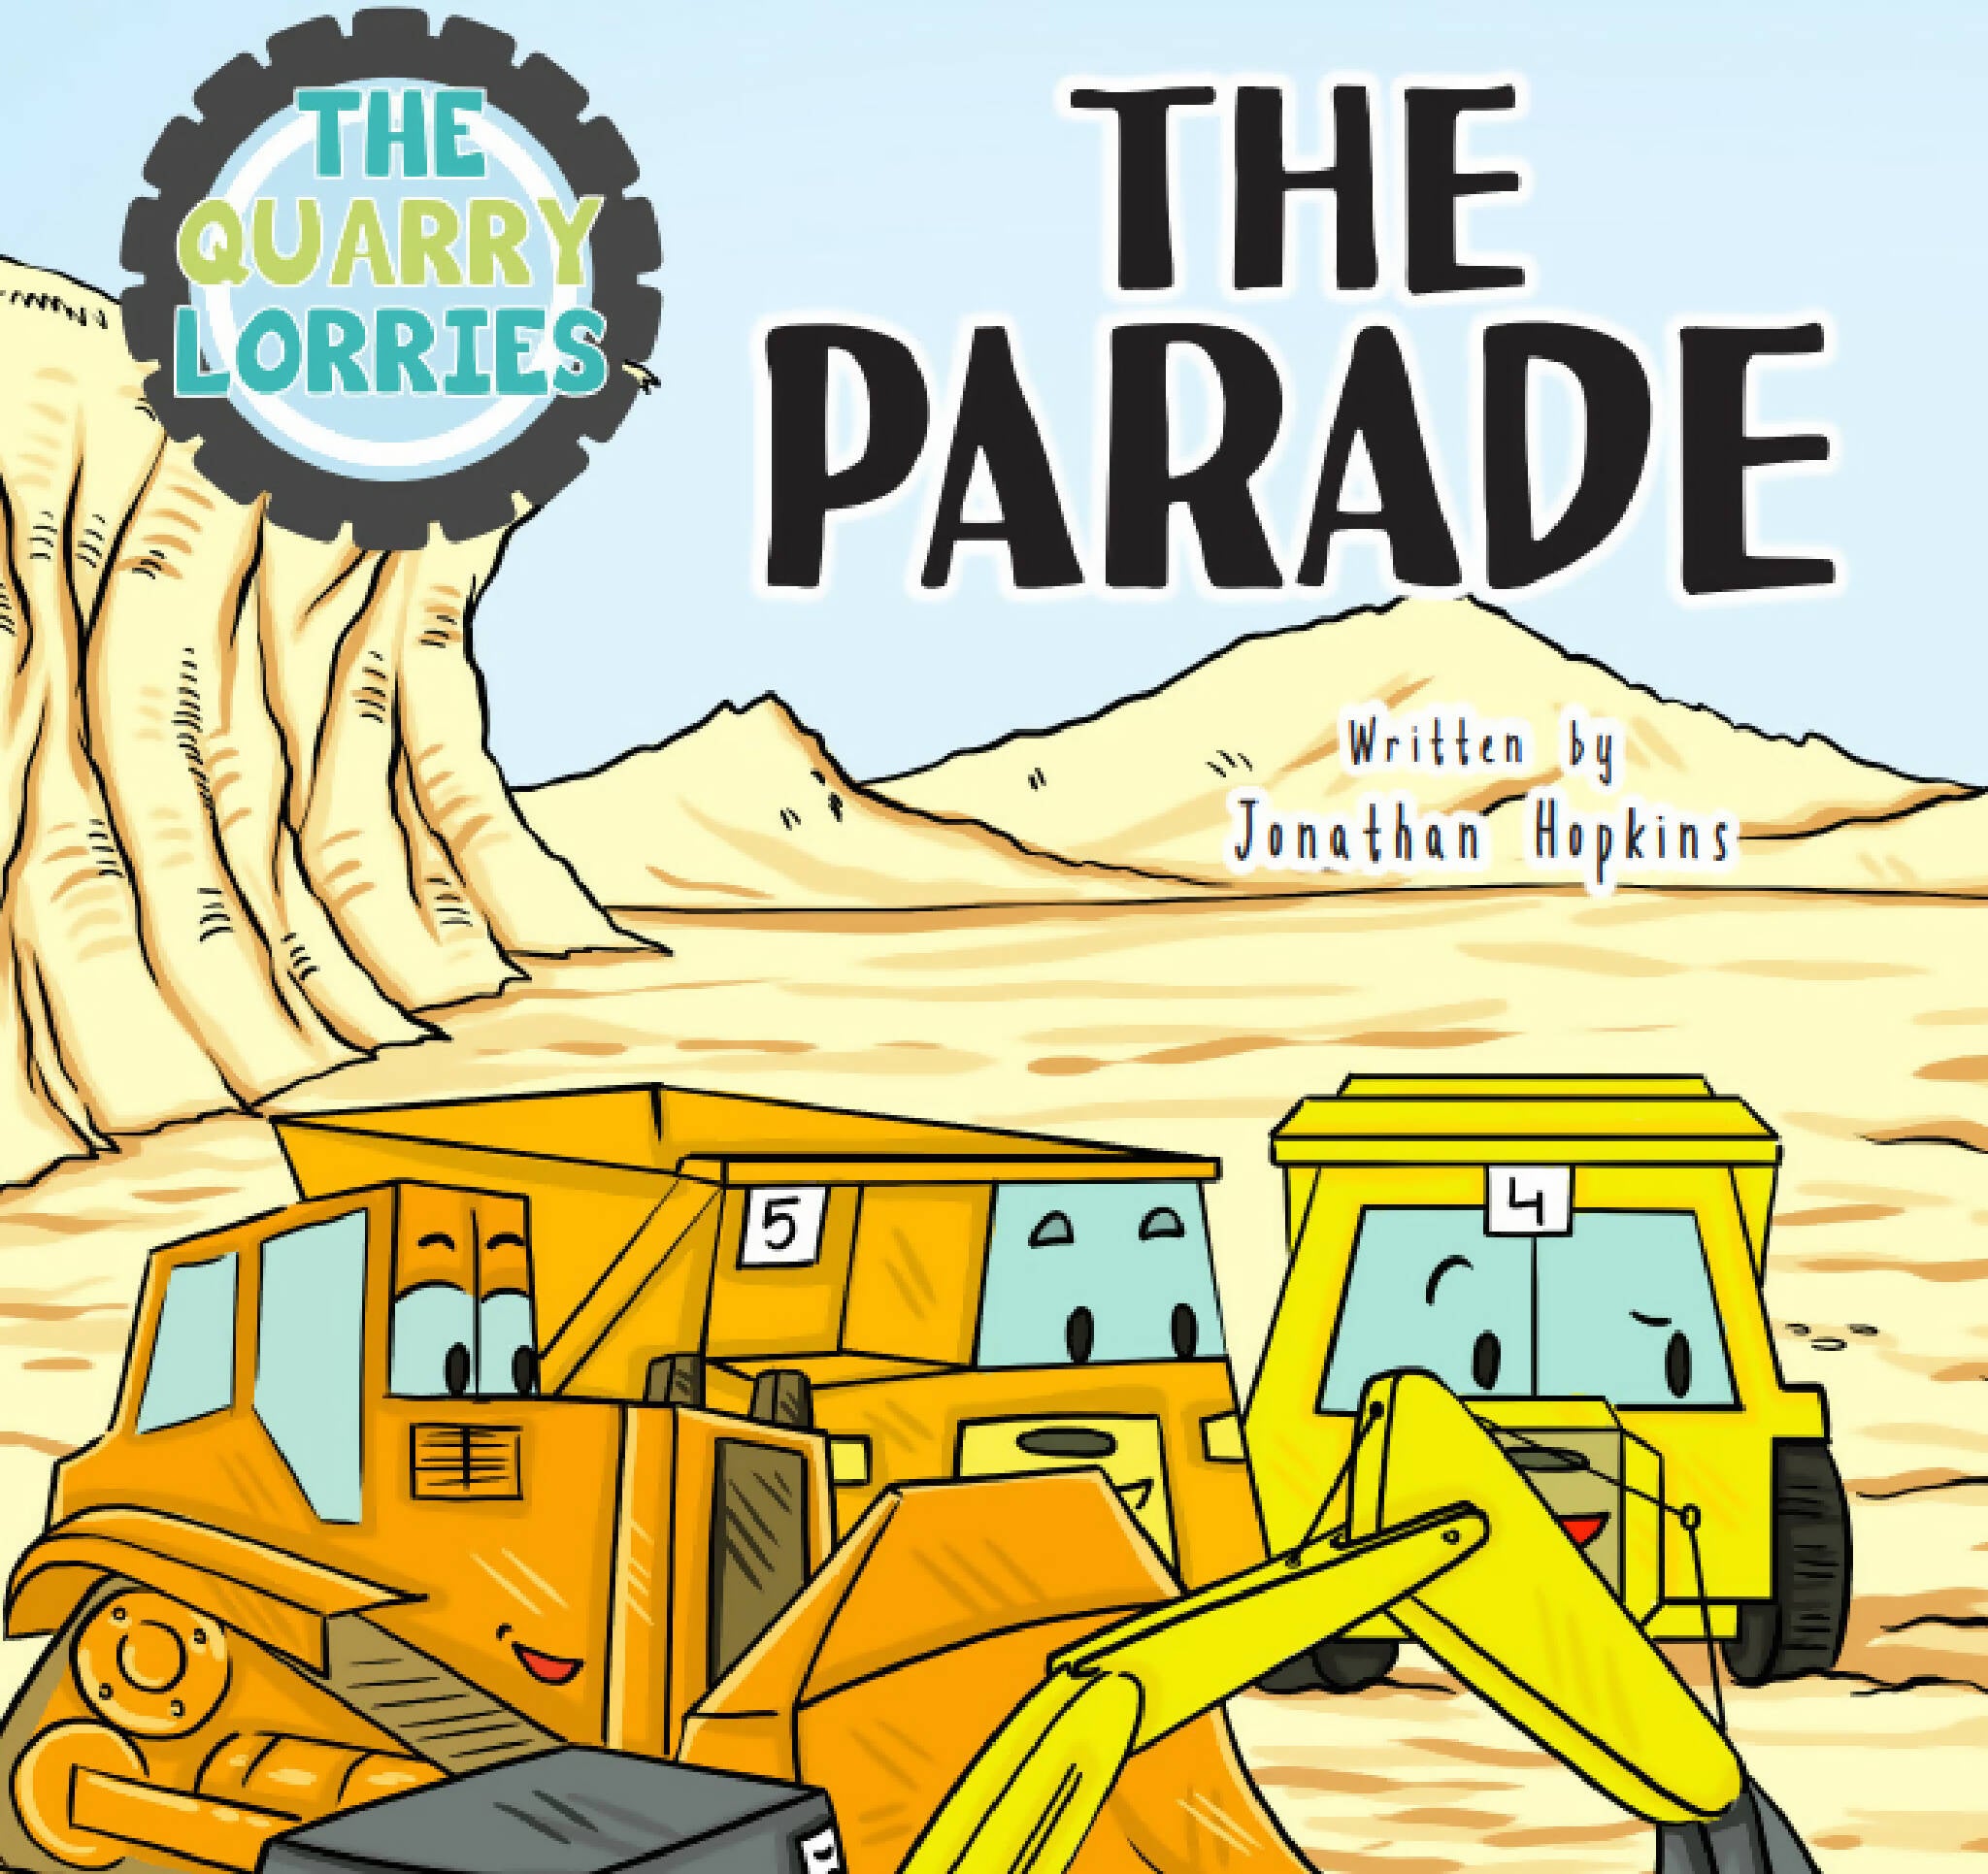 The Quarry Lorries: The Parade